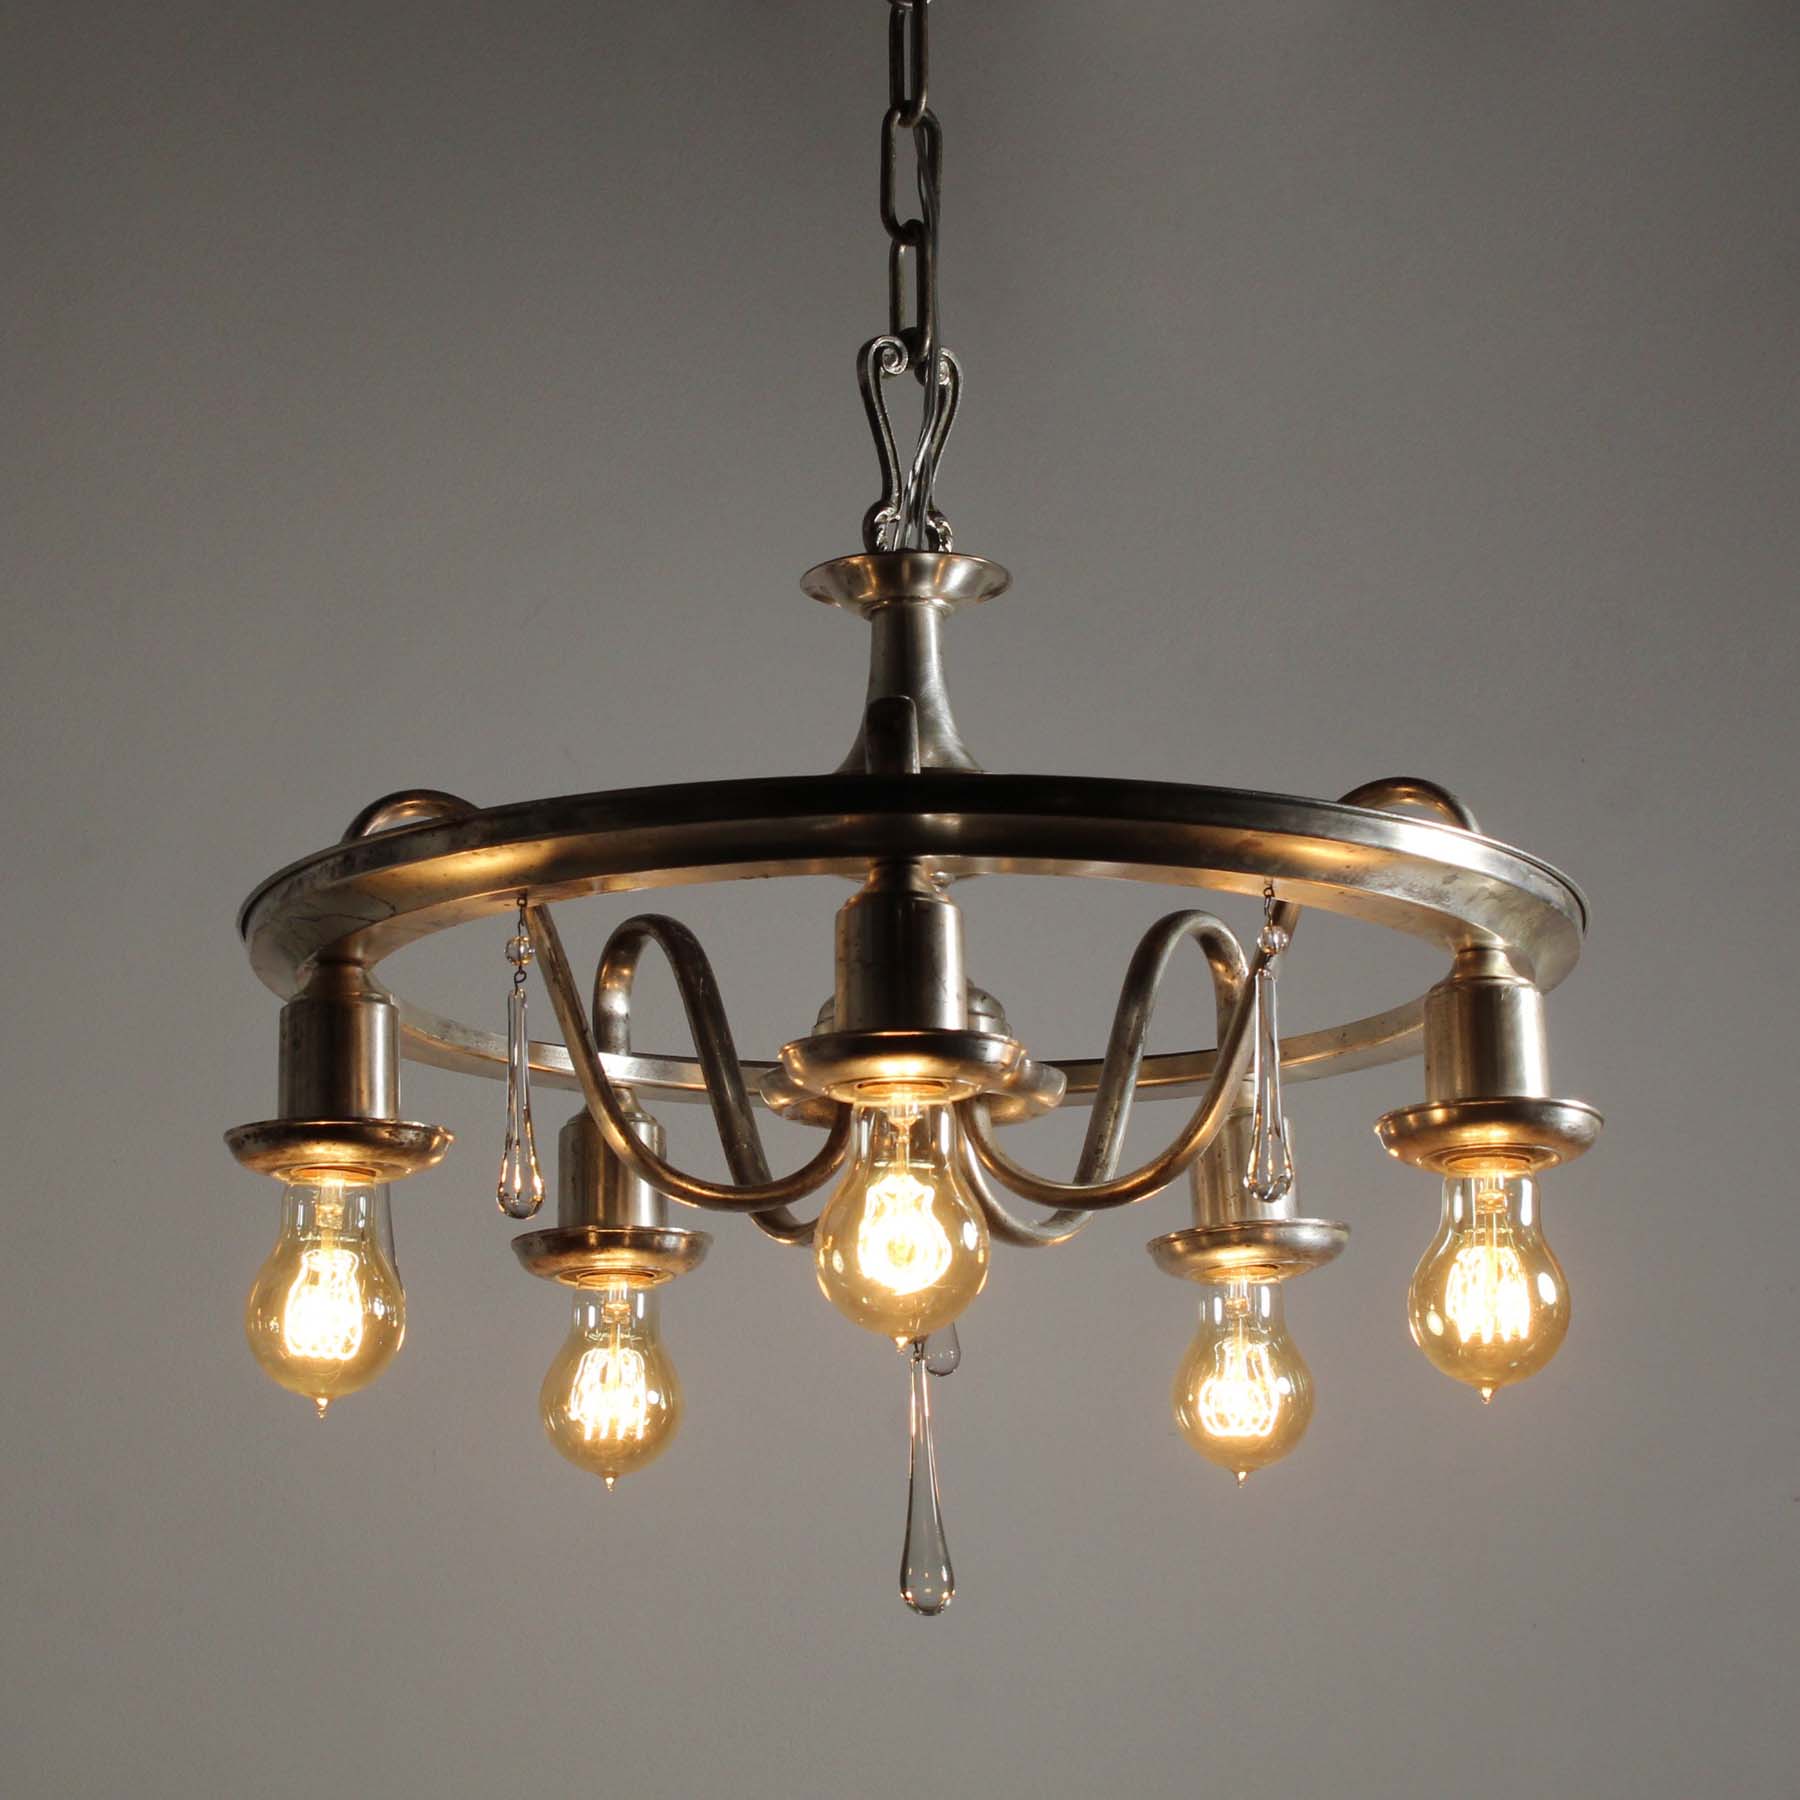 Neoclassical Silverplate Chandelier with Prisms, Antique Lighting-68964